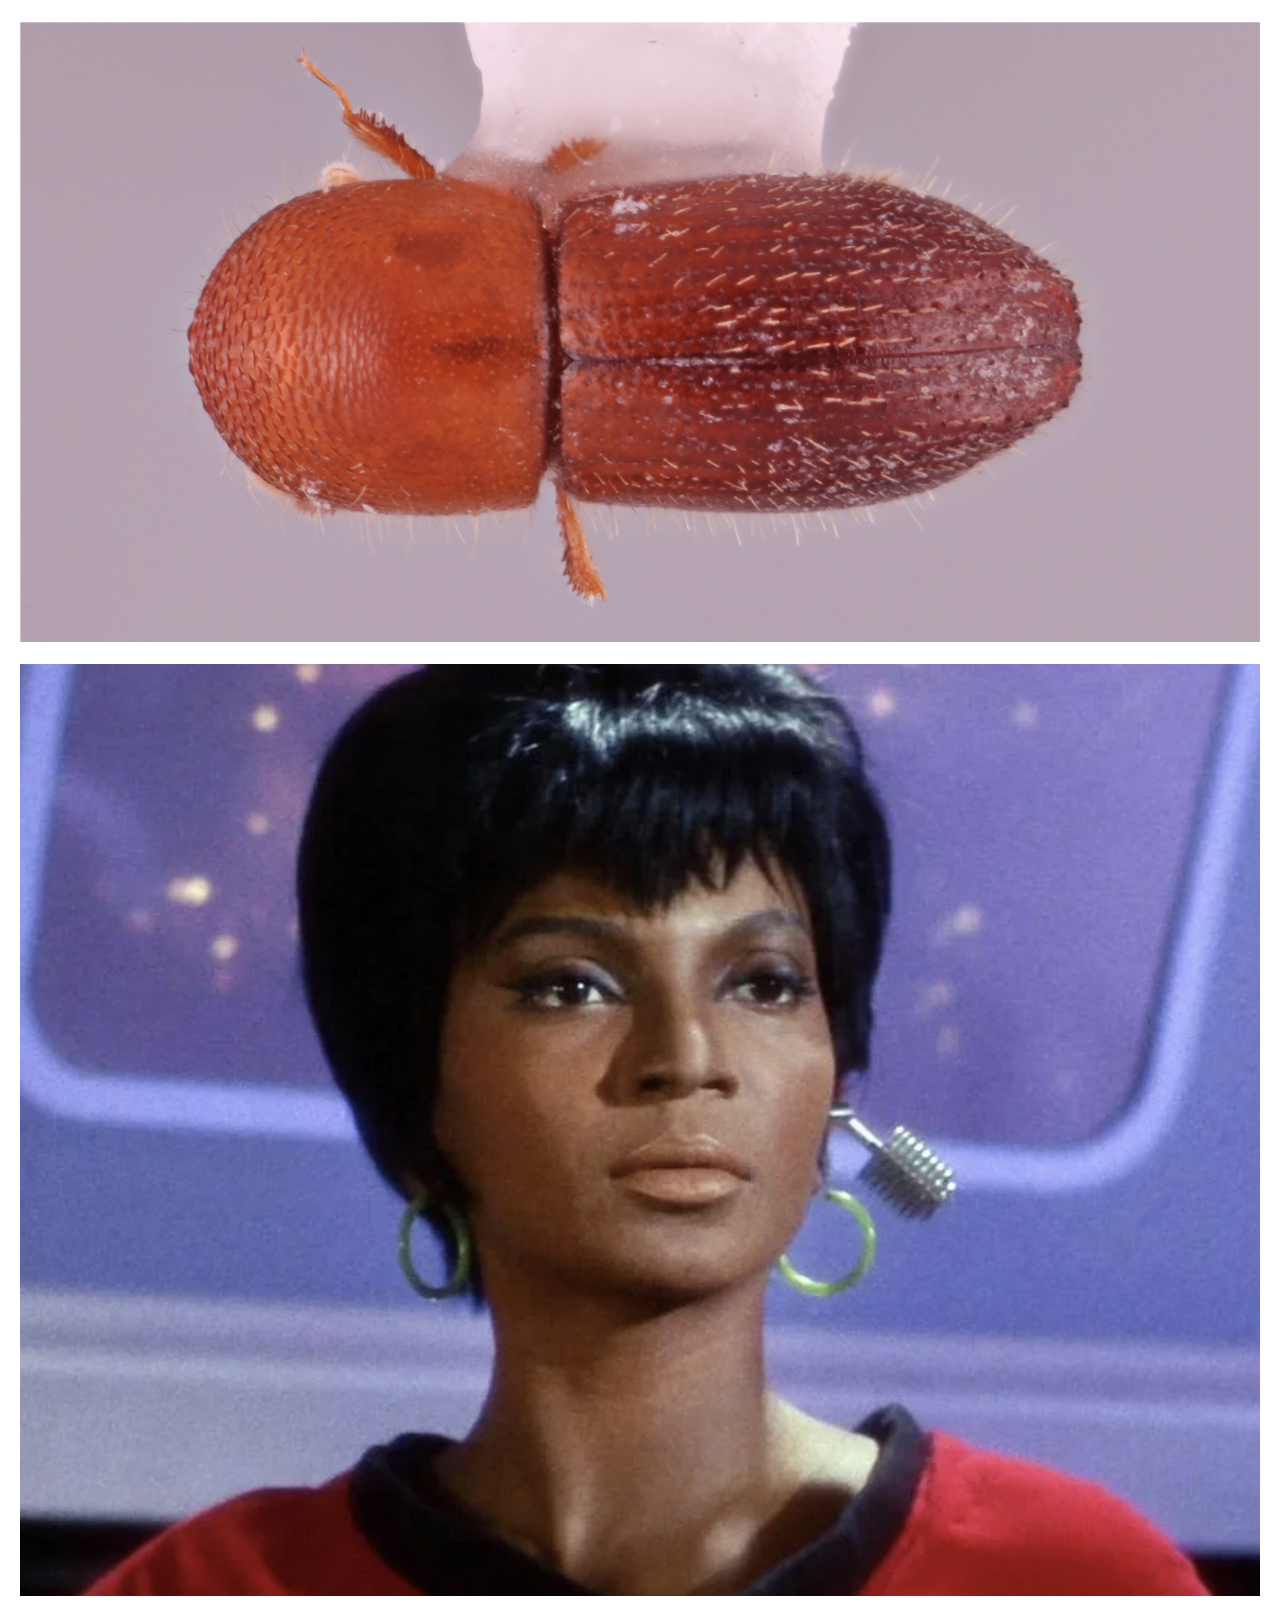 A photo of the Coptoborus uhura, so named because its color is reminiscent of the red uniform worn by Lt. Uhura from the original Star Trek television series, who is shown in a photo below, played by Nichelle Nichols.